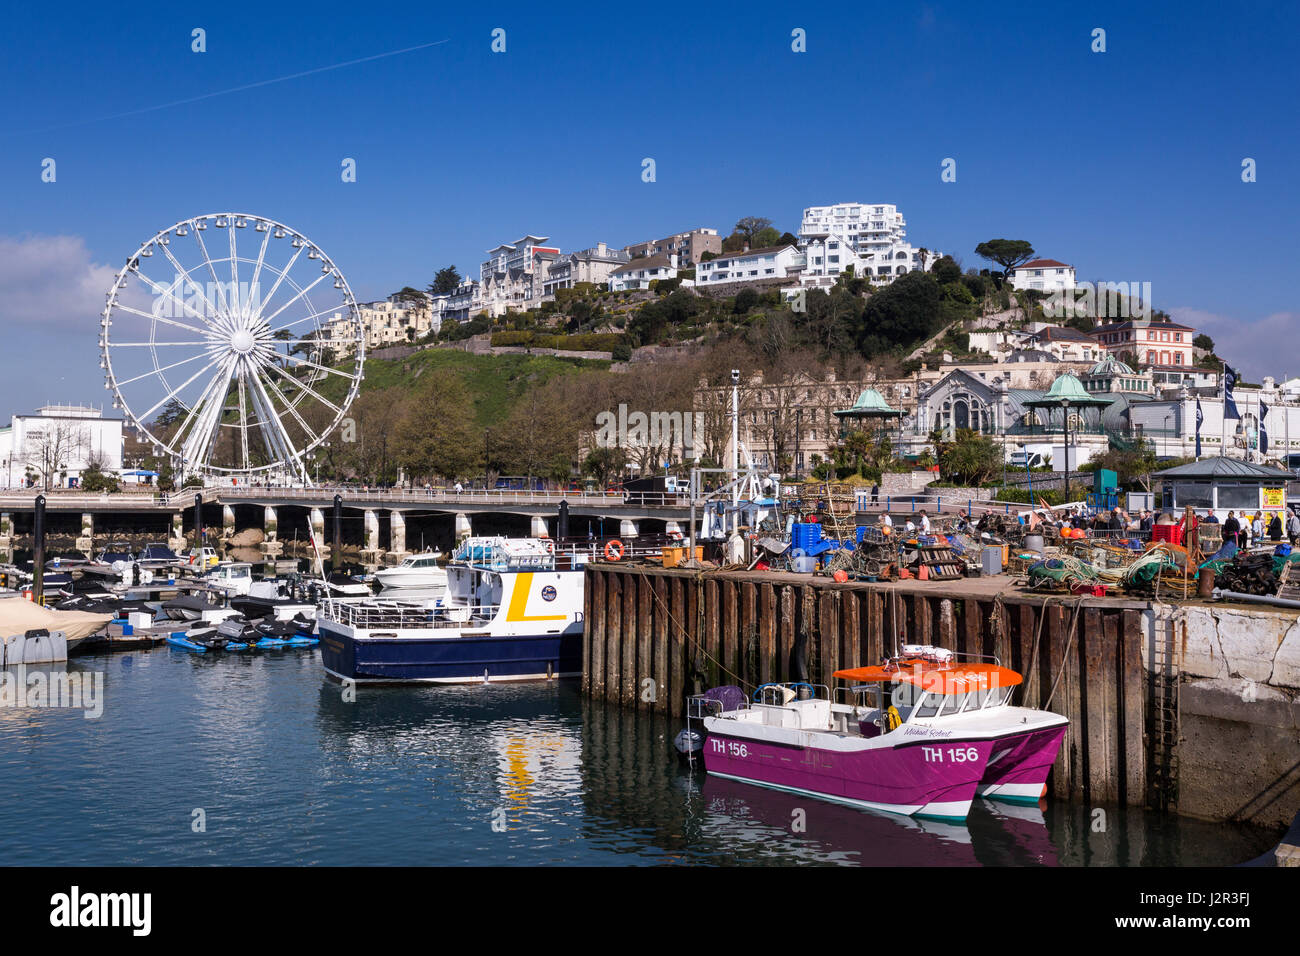 A view of the harbour at Torquay, Devon, UK Stock Photo